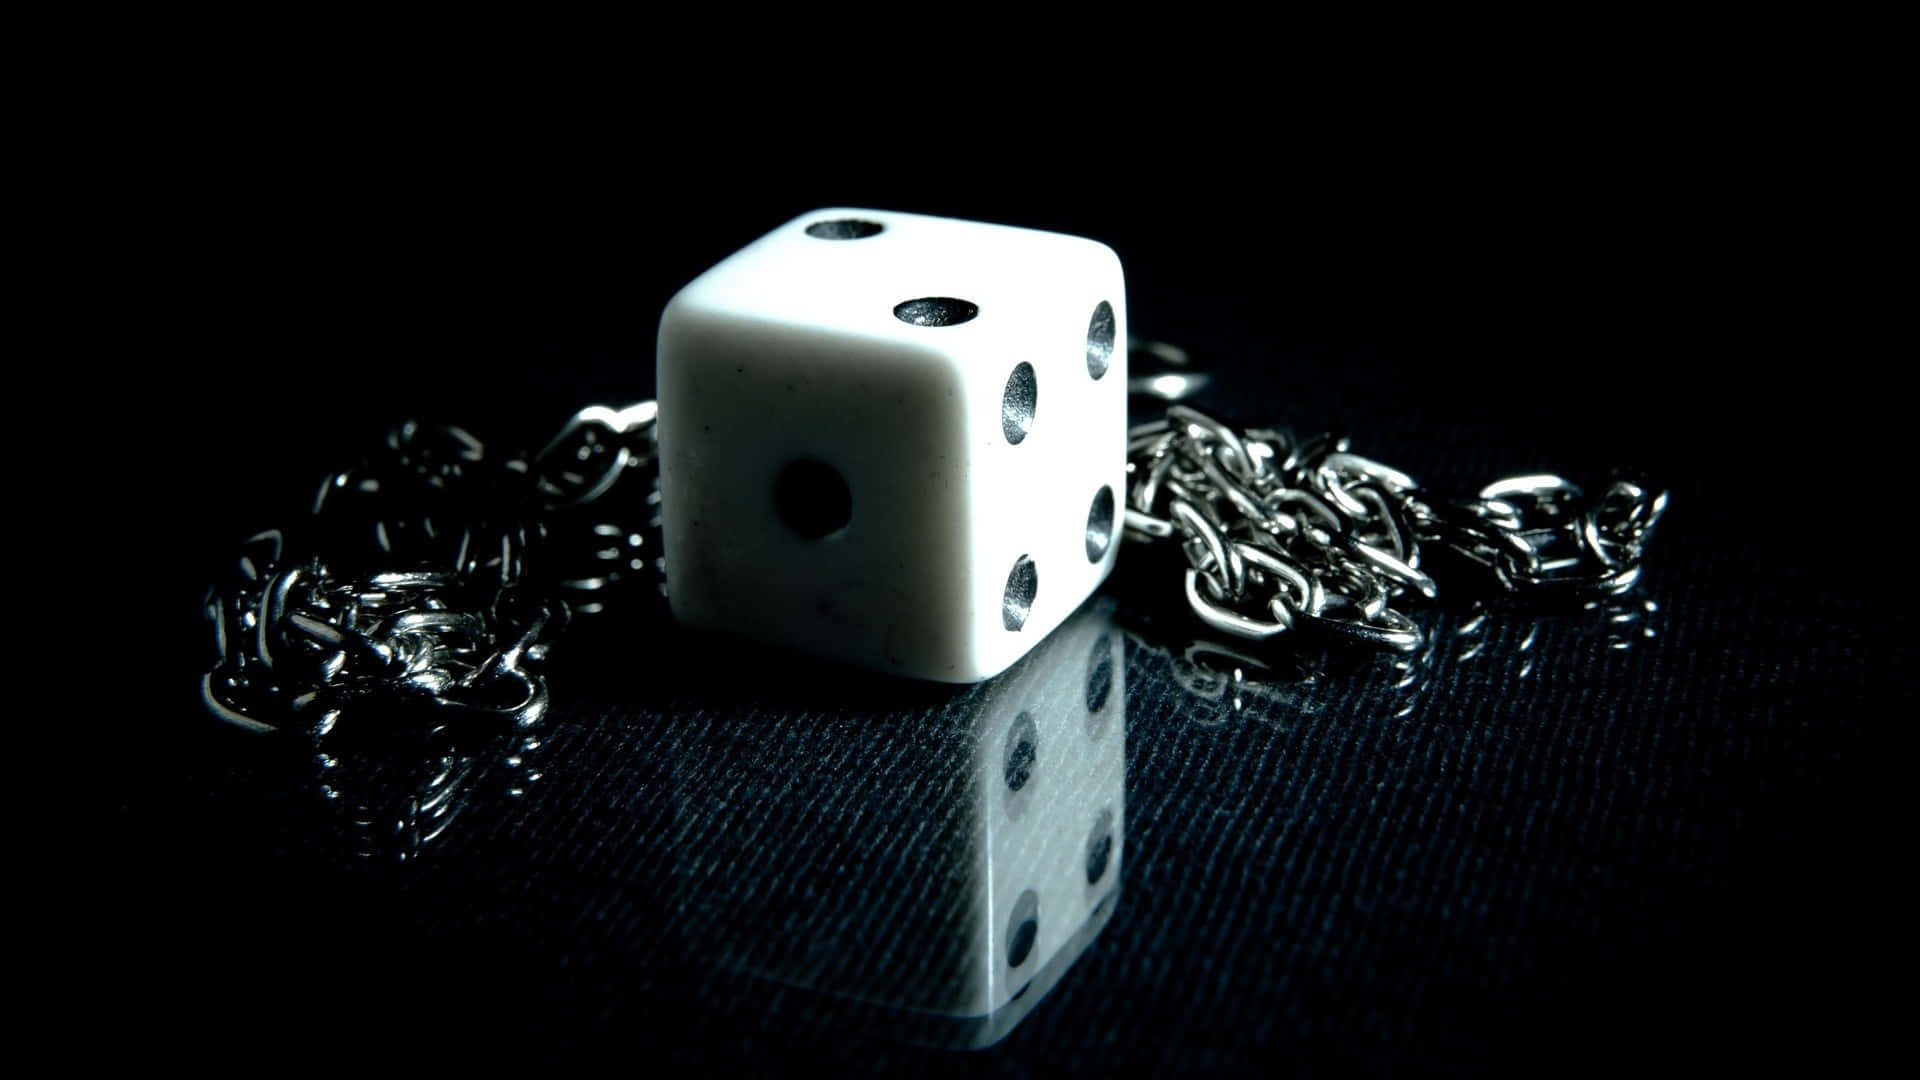 White Dice Chain Reflection